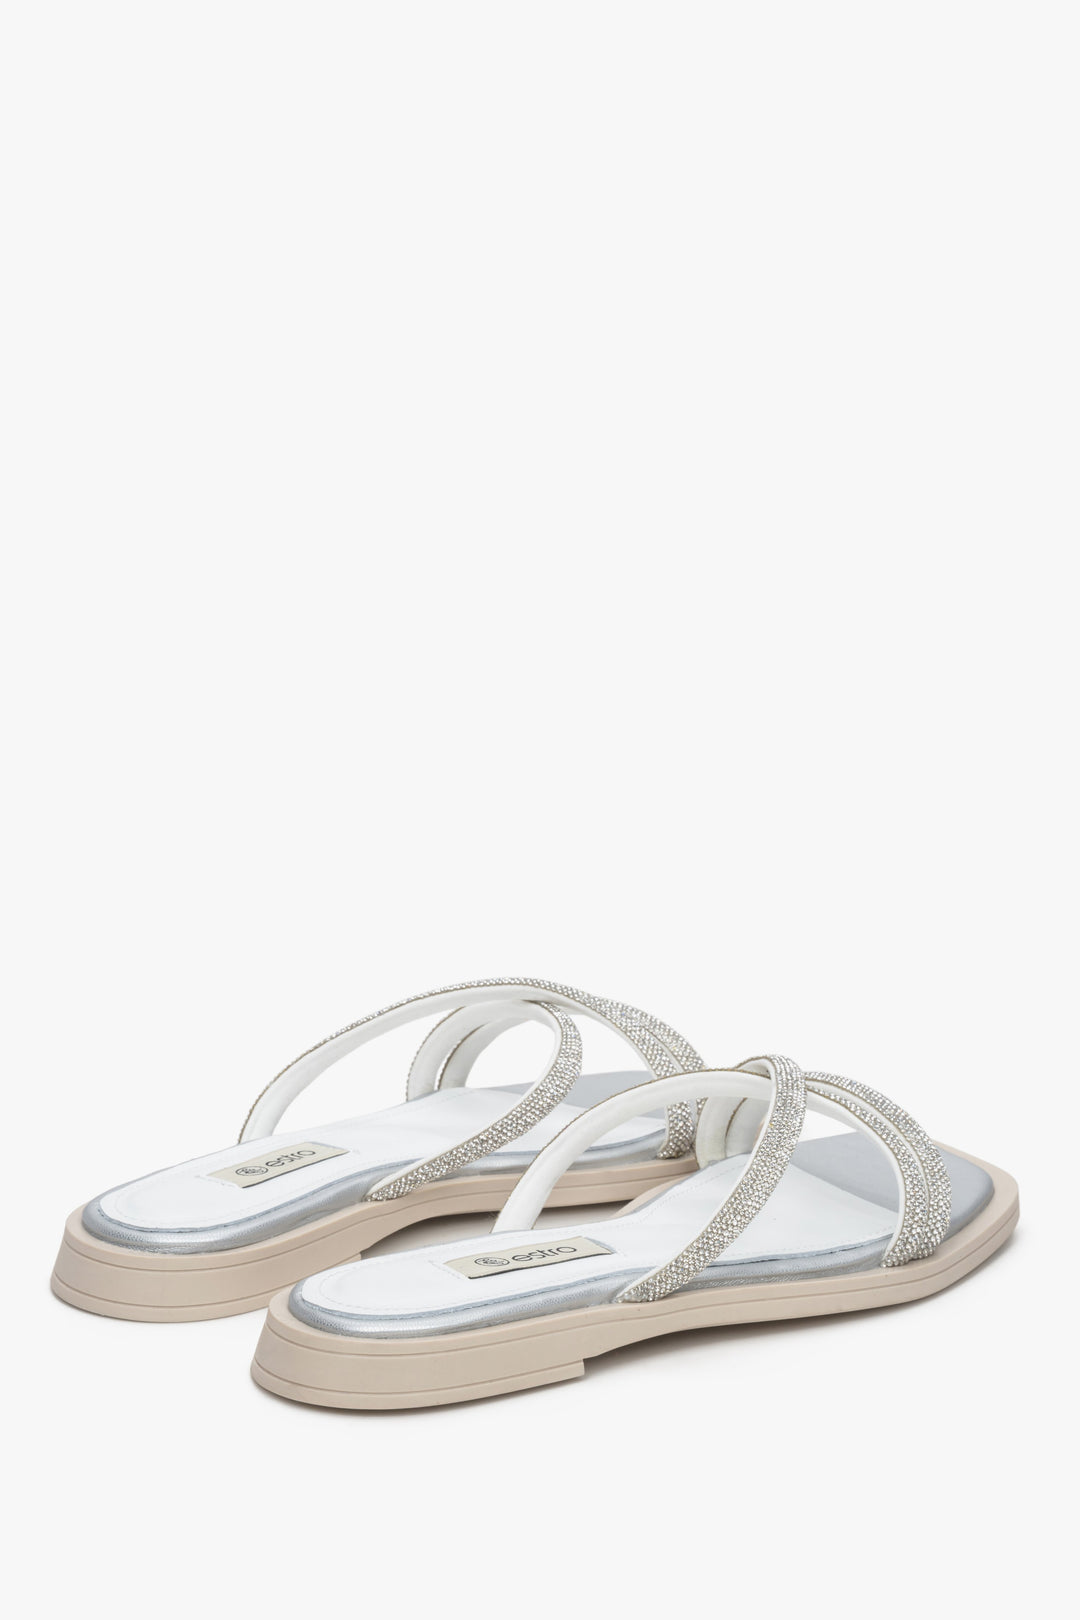 Women's flat slide sandals in silver colour with zirconia.